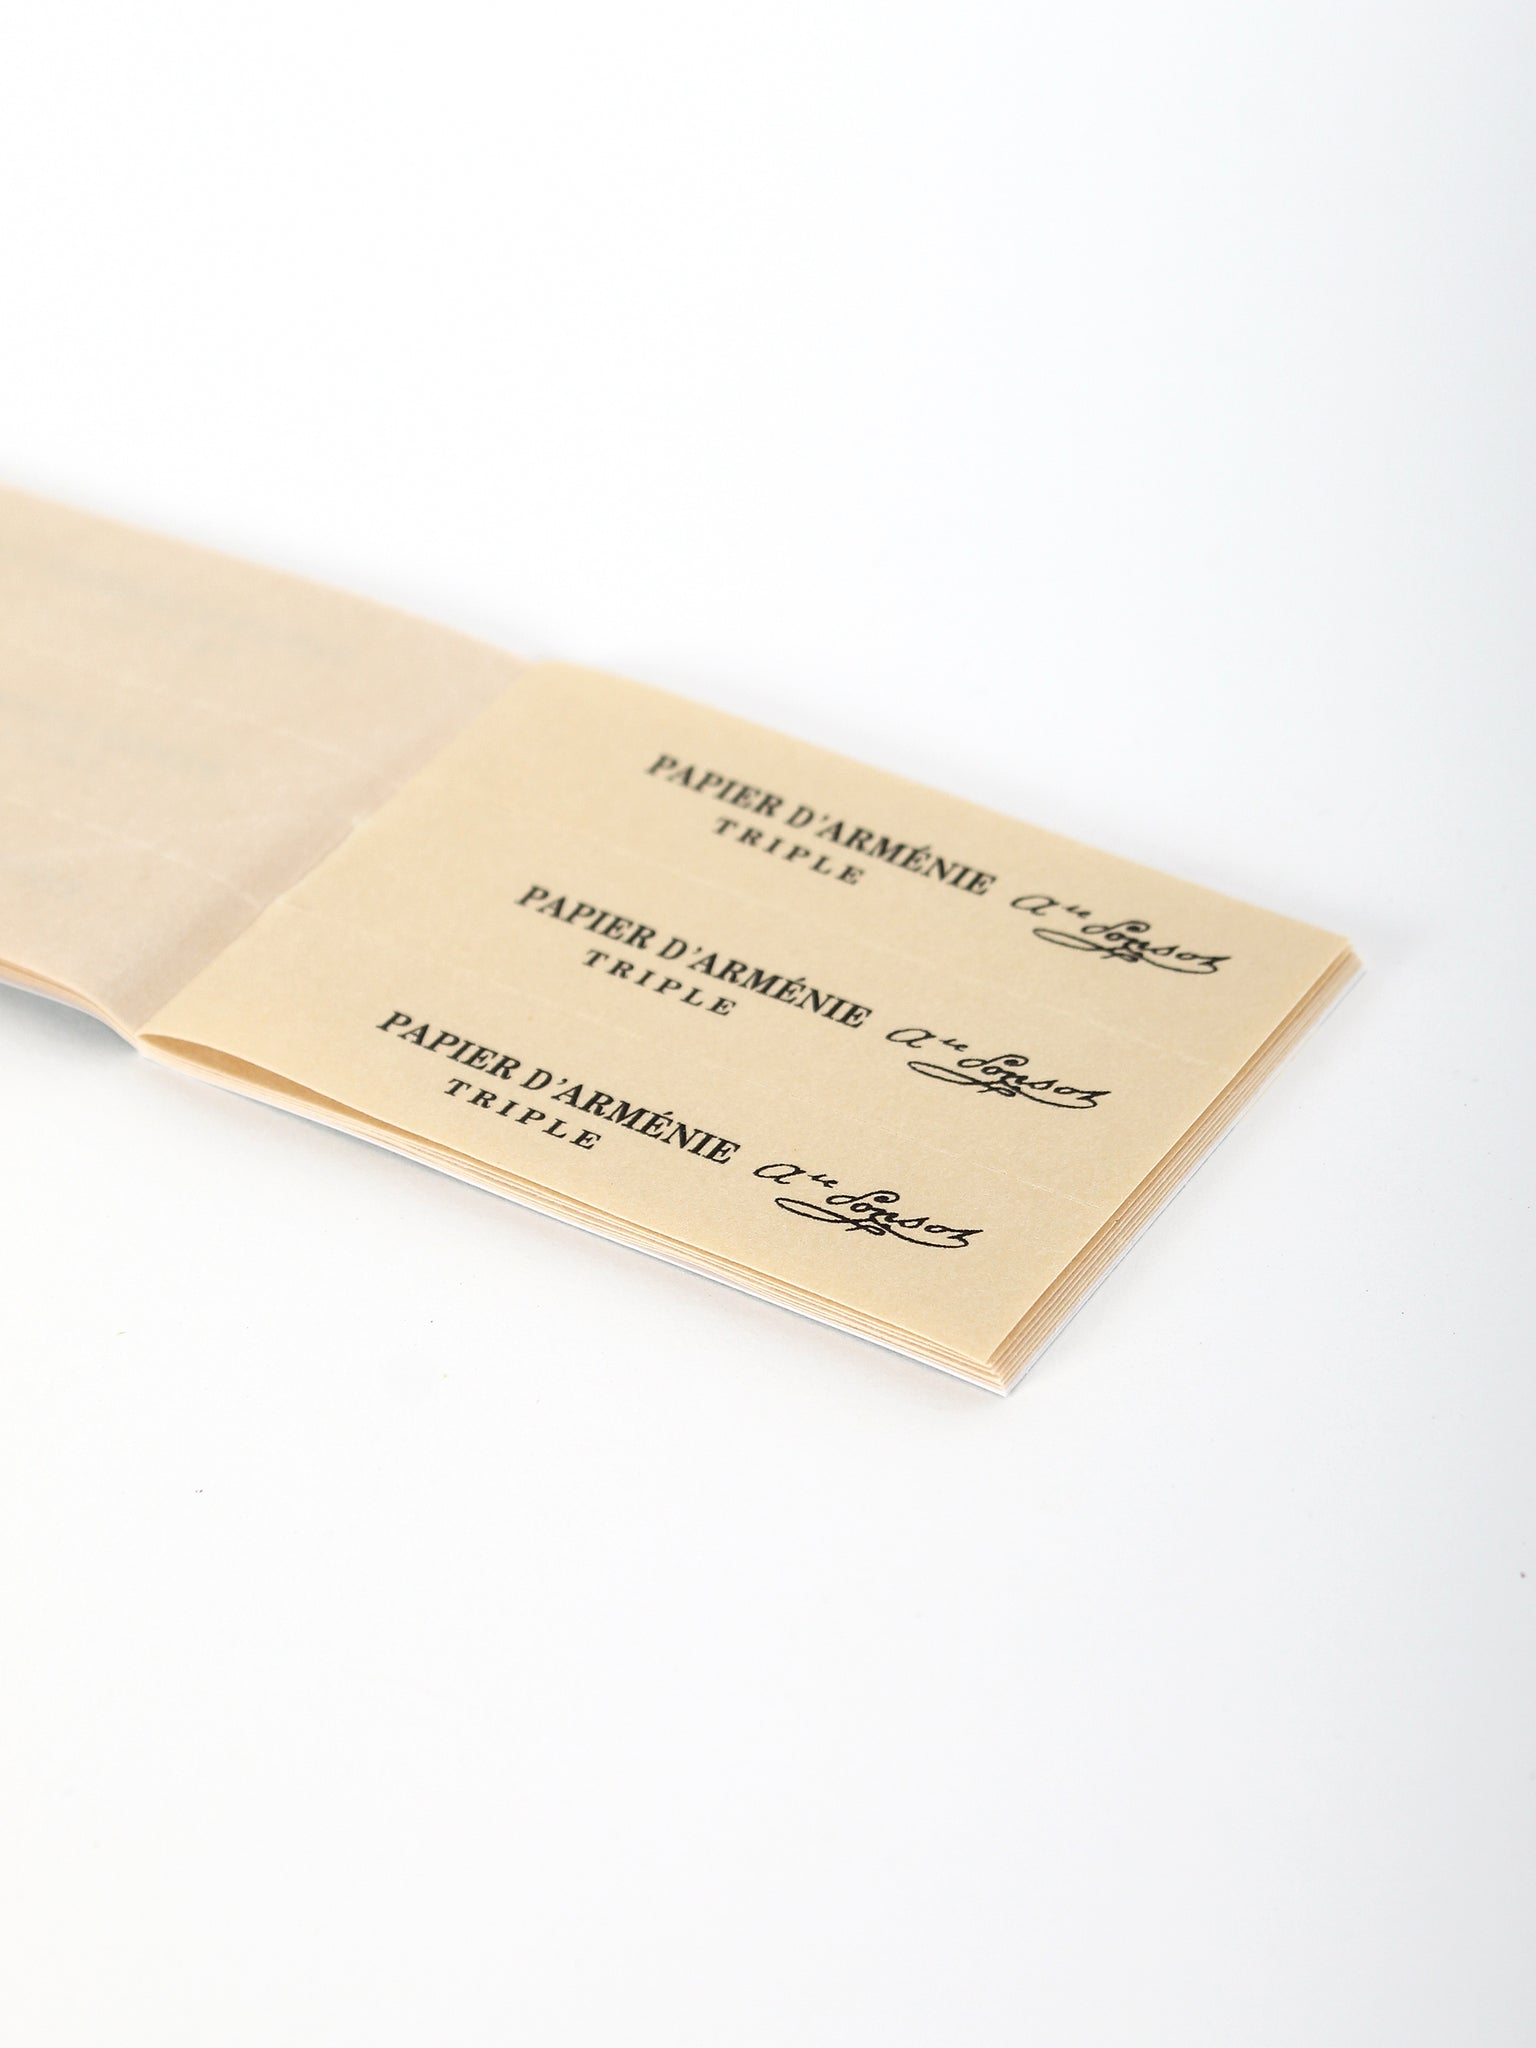 Papier d'Armenie Incense Burning Papers - The Foundry Home Goods